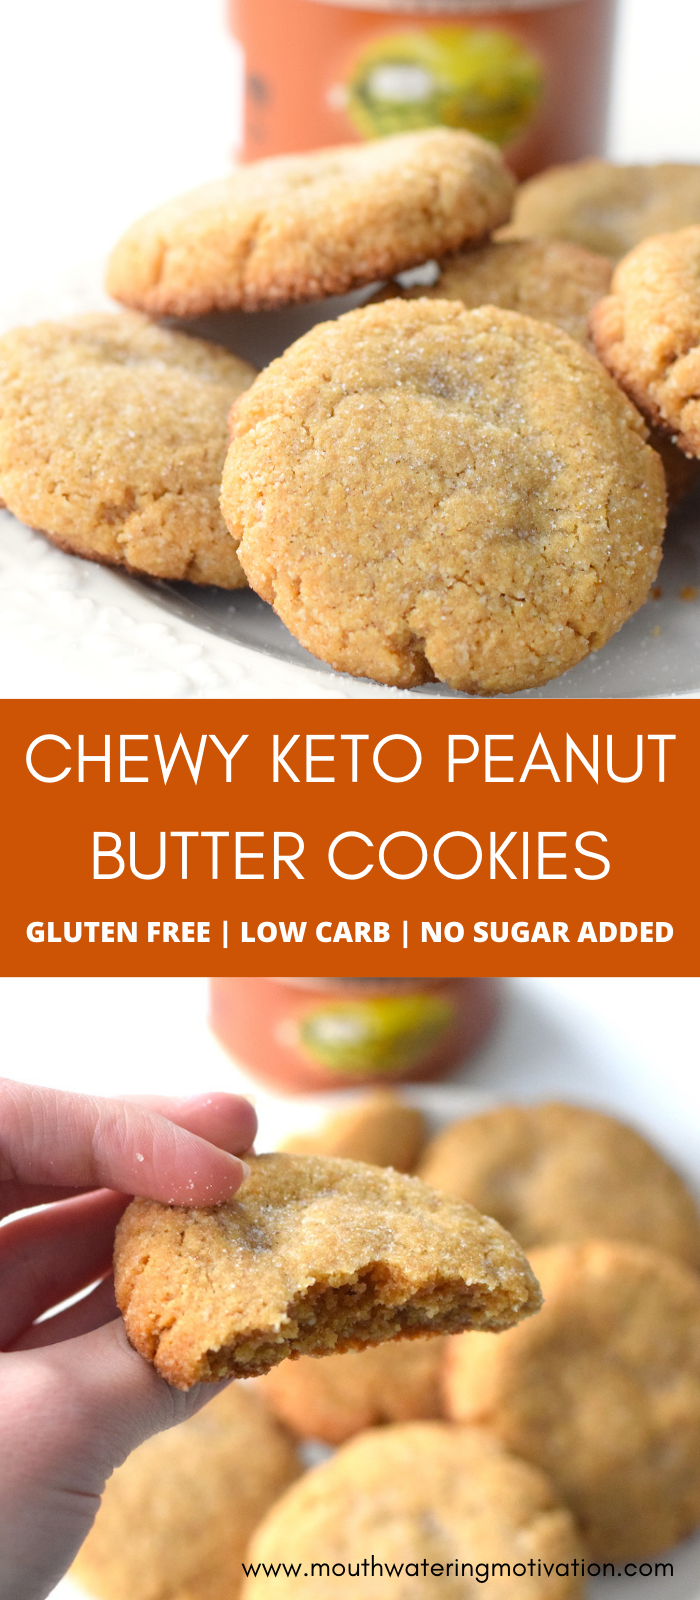 CHEWY KETO PEANUT BUTTER COOKIES